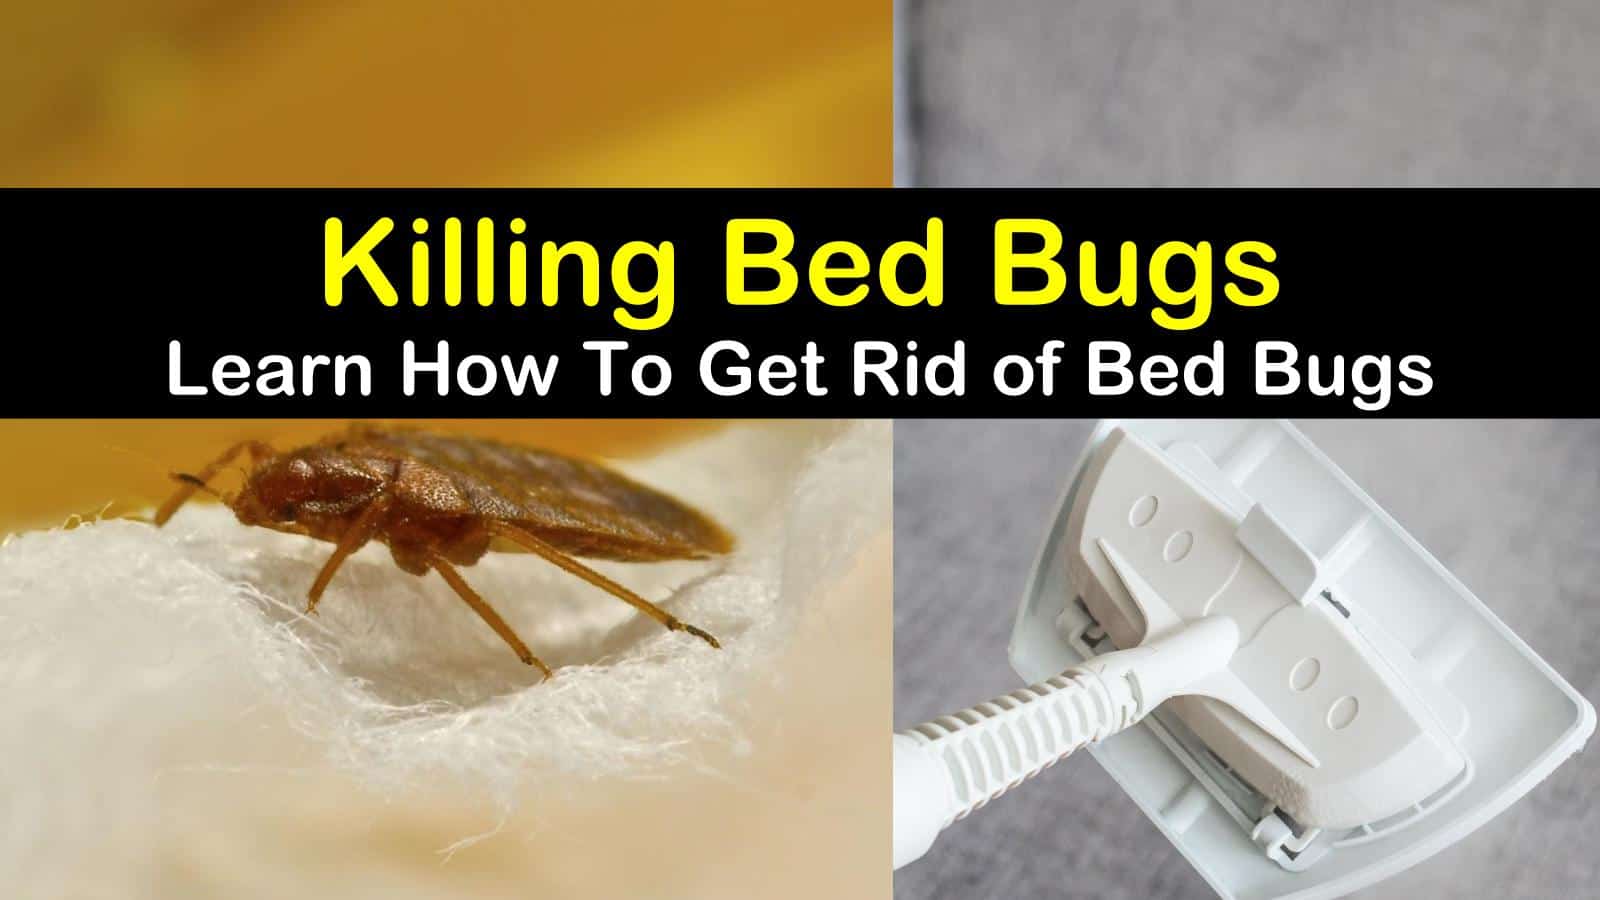 HOW TO GET RID OF BEDBUGS FAST